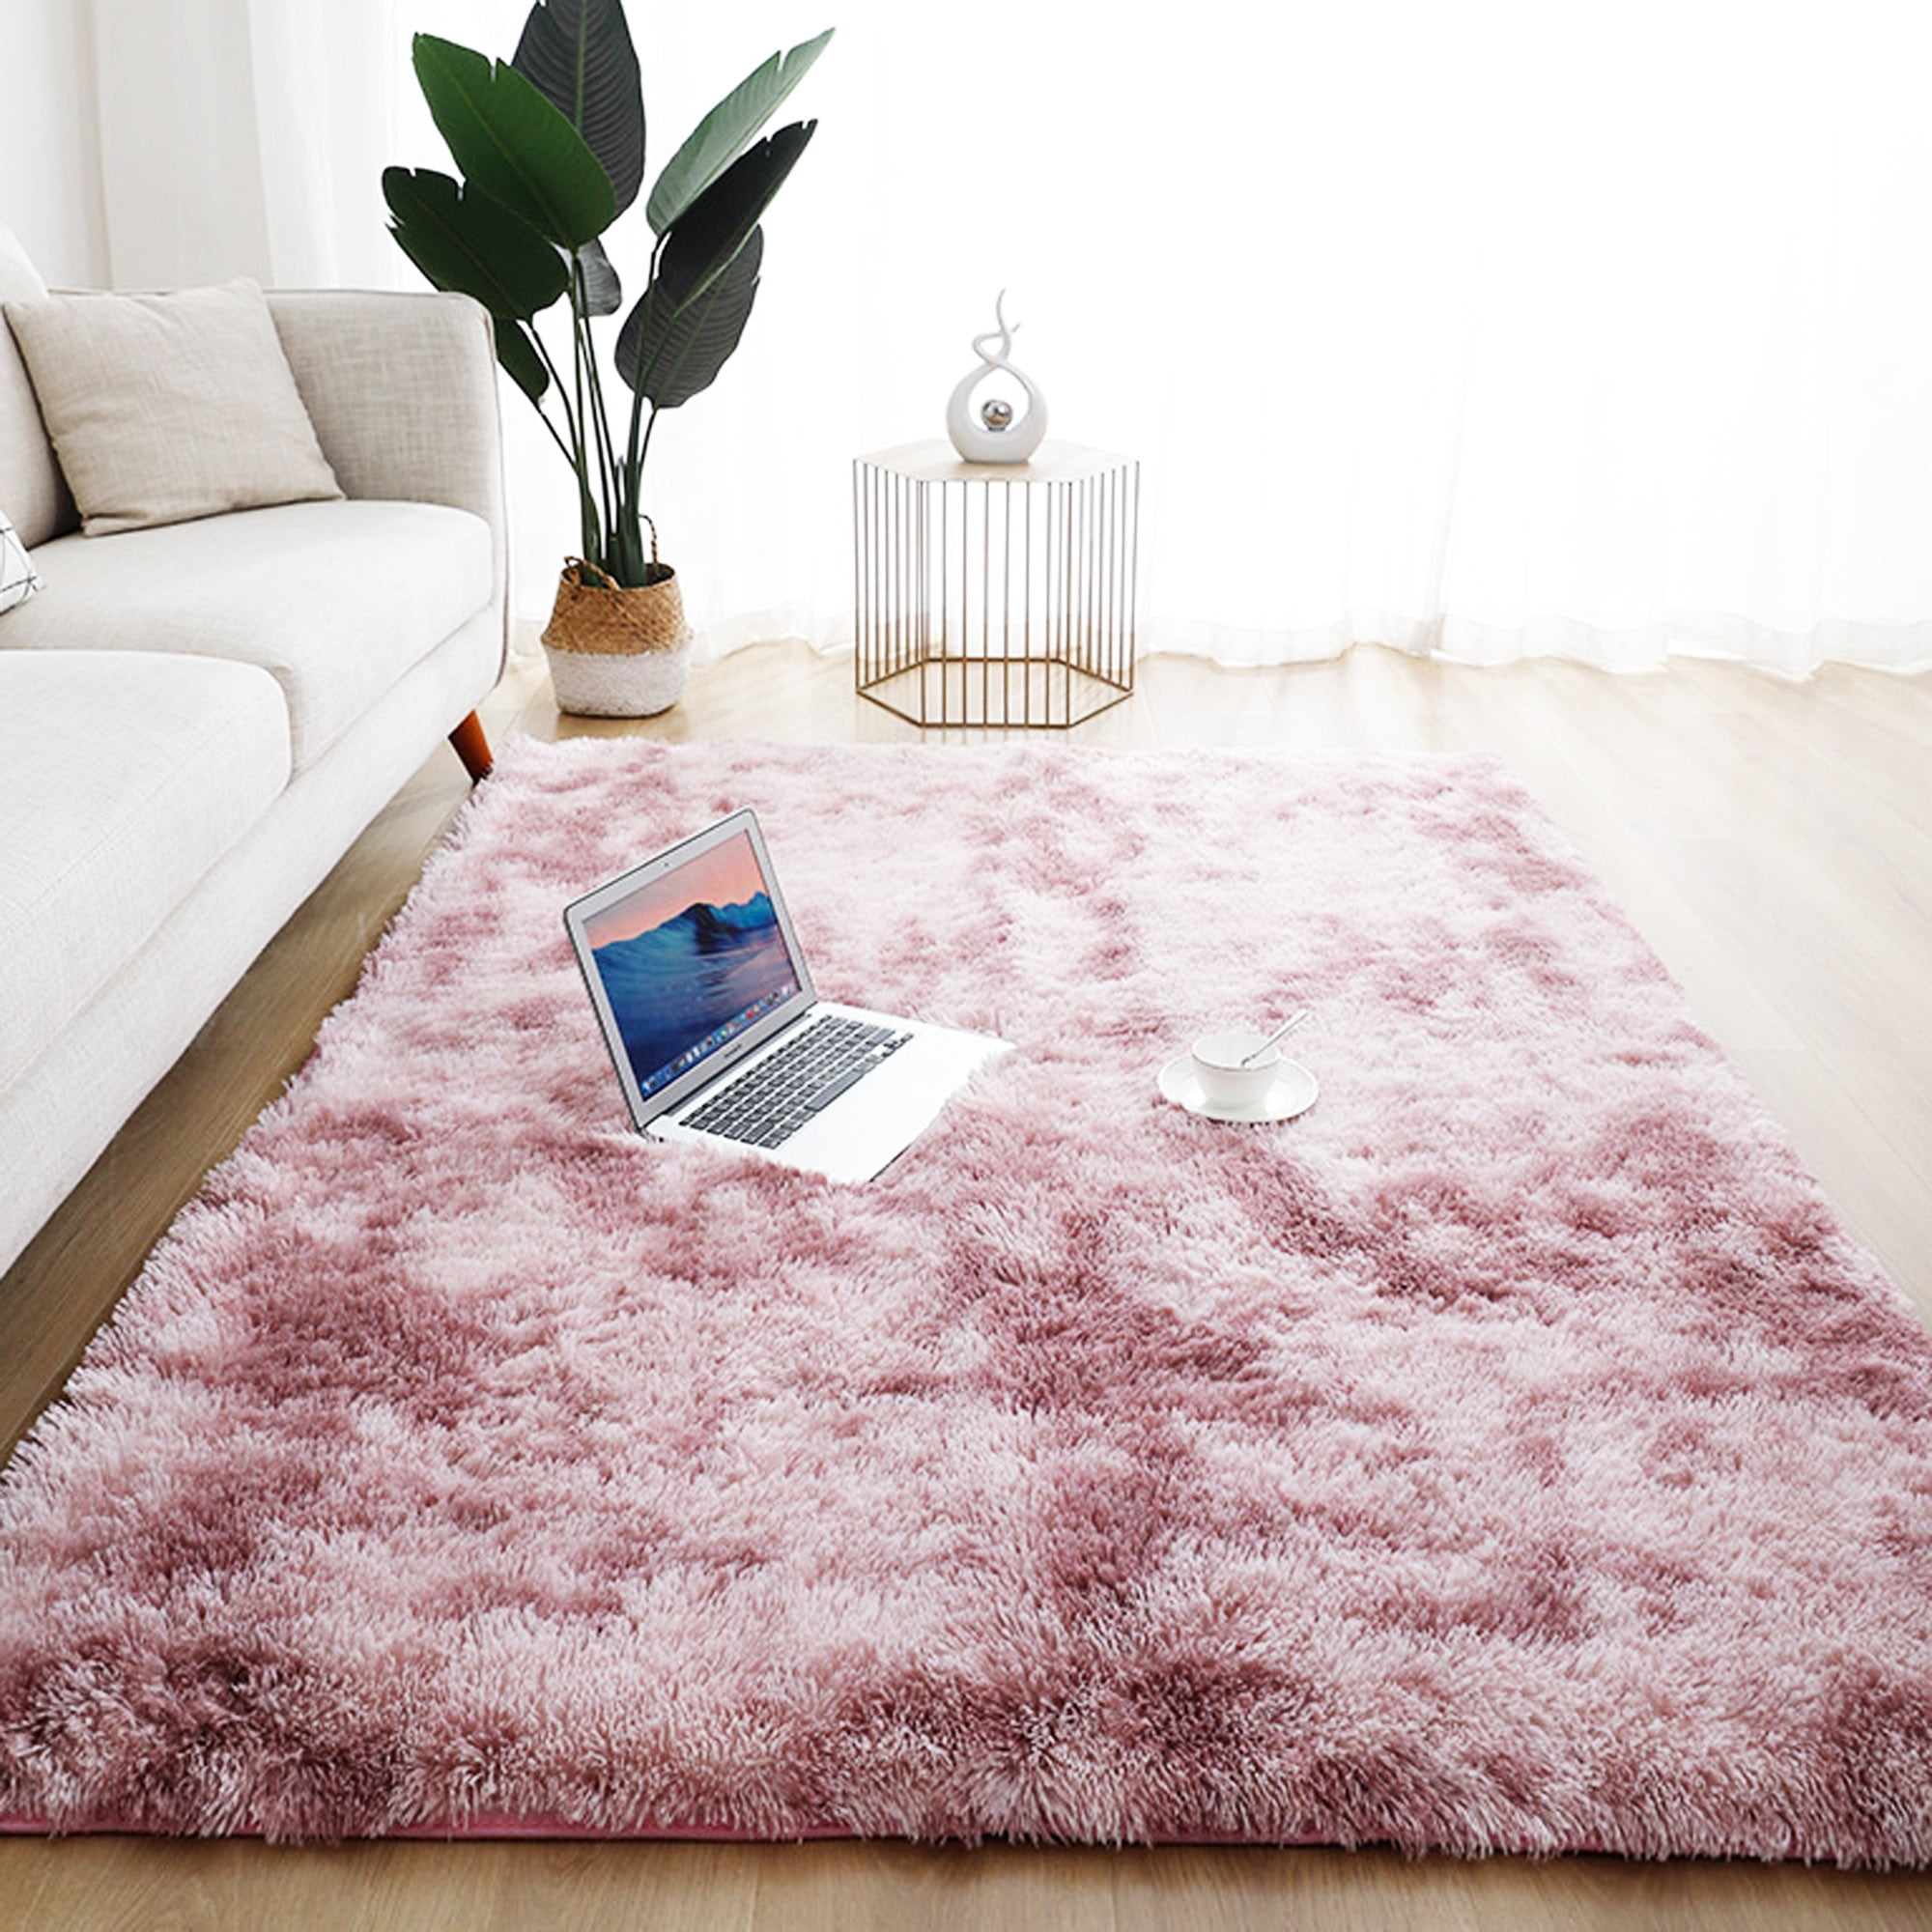 Colorful Watercolor Donuts Round Floor Mat Bedroom Carpet Living Room Area Rugs 